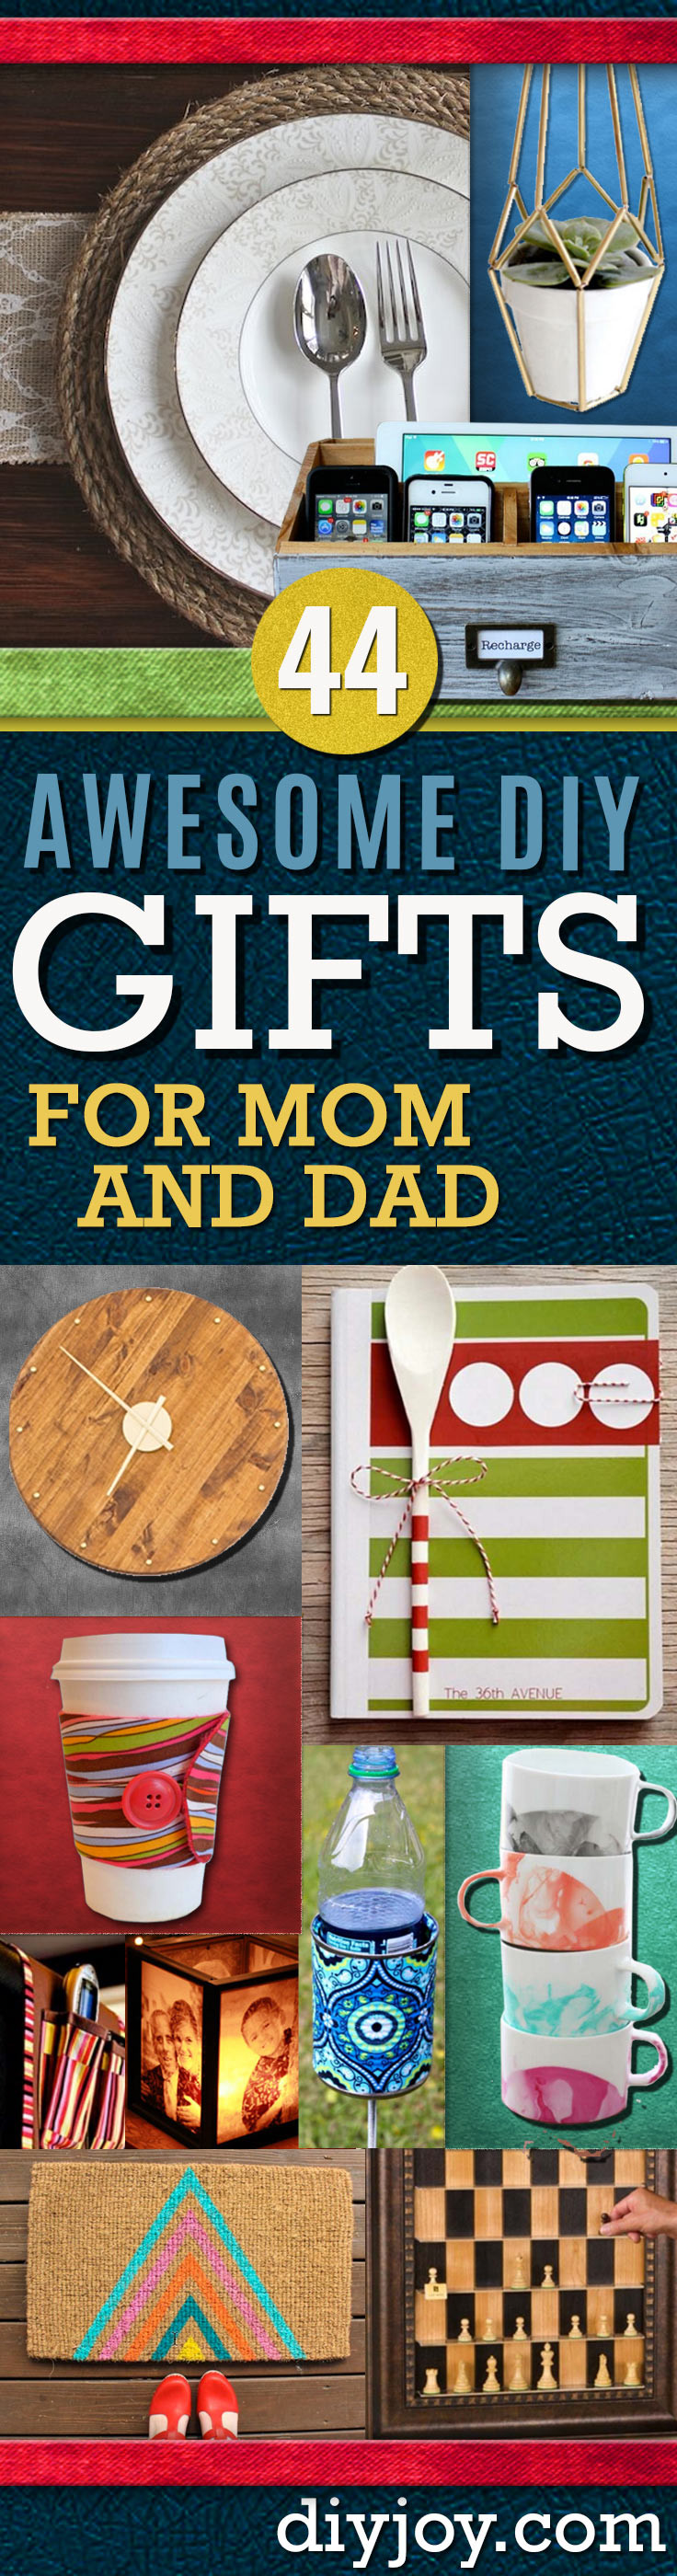 DIY Christmas Presents For Dads
 Awesome DIY Gift Ideas Mom and Dad Will Love